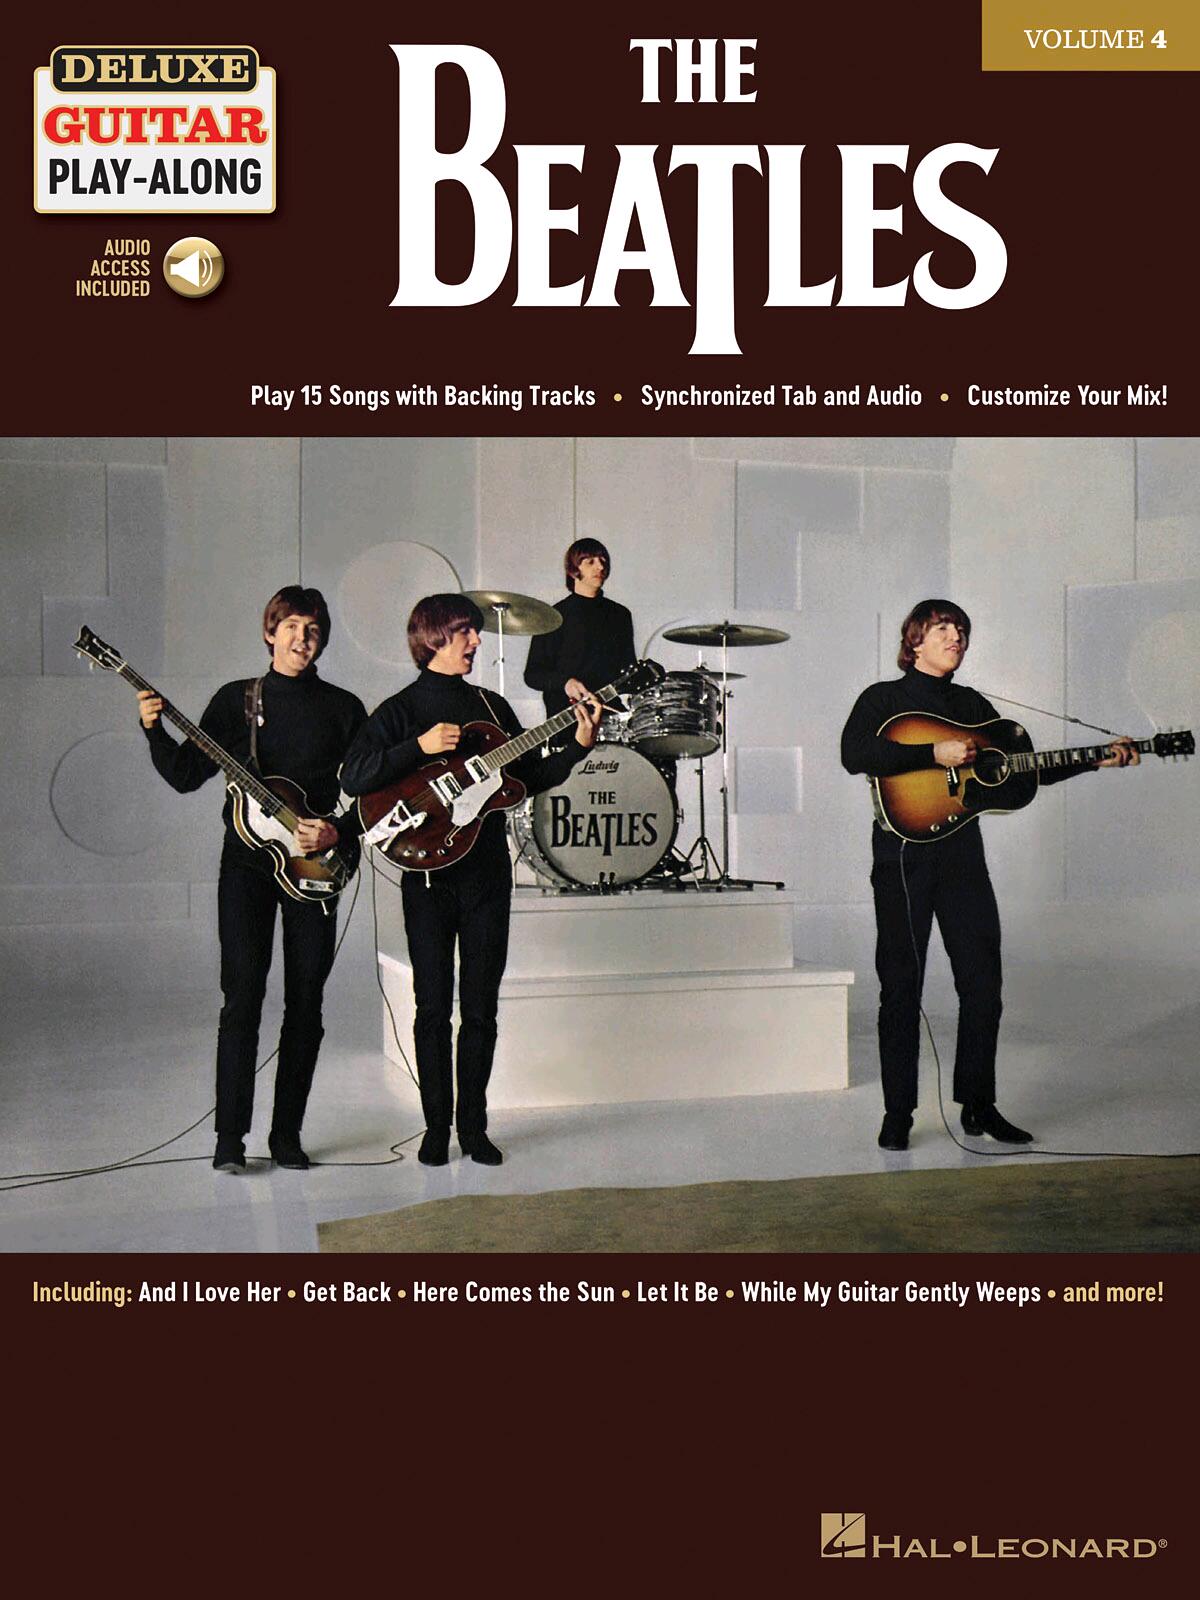 The Beatles Deluxe Guitar Play-Along Volume 4 : photo 1